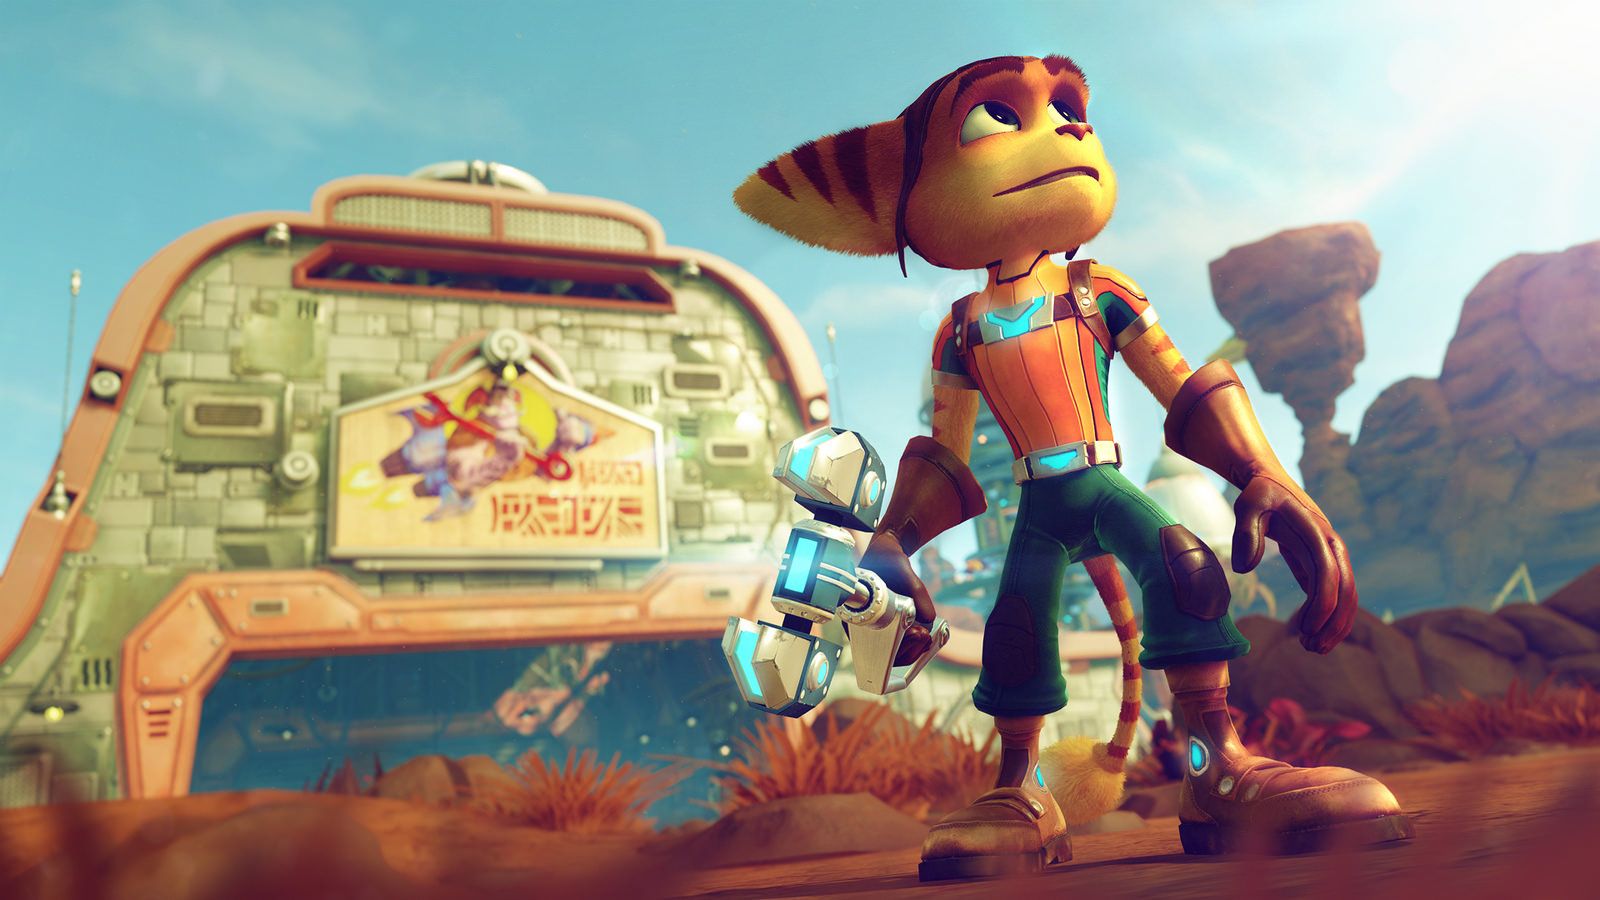 Image for Watch Clank break things in this Ratchet & Clank gameplay from Paris Games Week